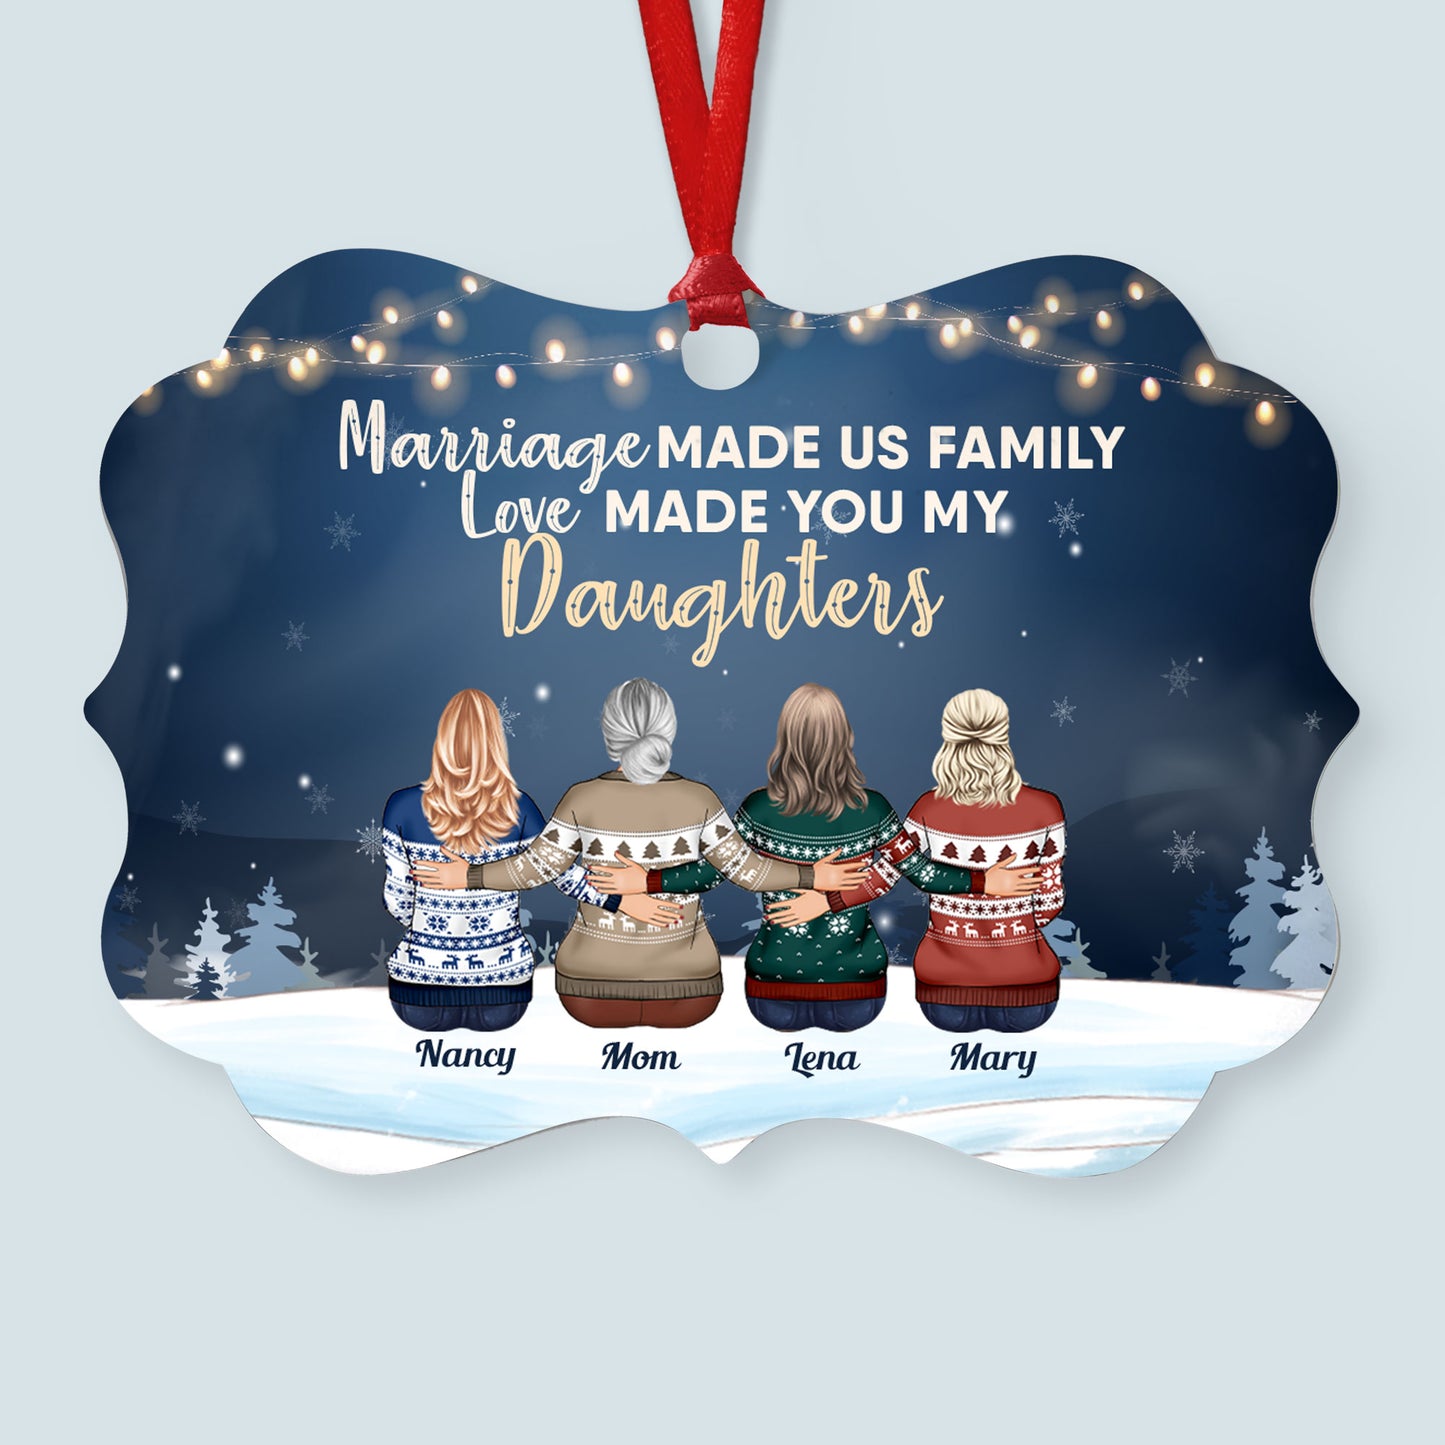 Marriage Made Us Family, Love Made You My Daughters - Personalized Aluminum Ornament - Christmas Gift For In-Law Family - Family Hugging